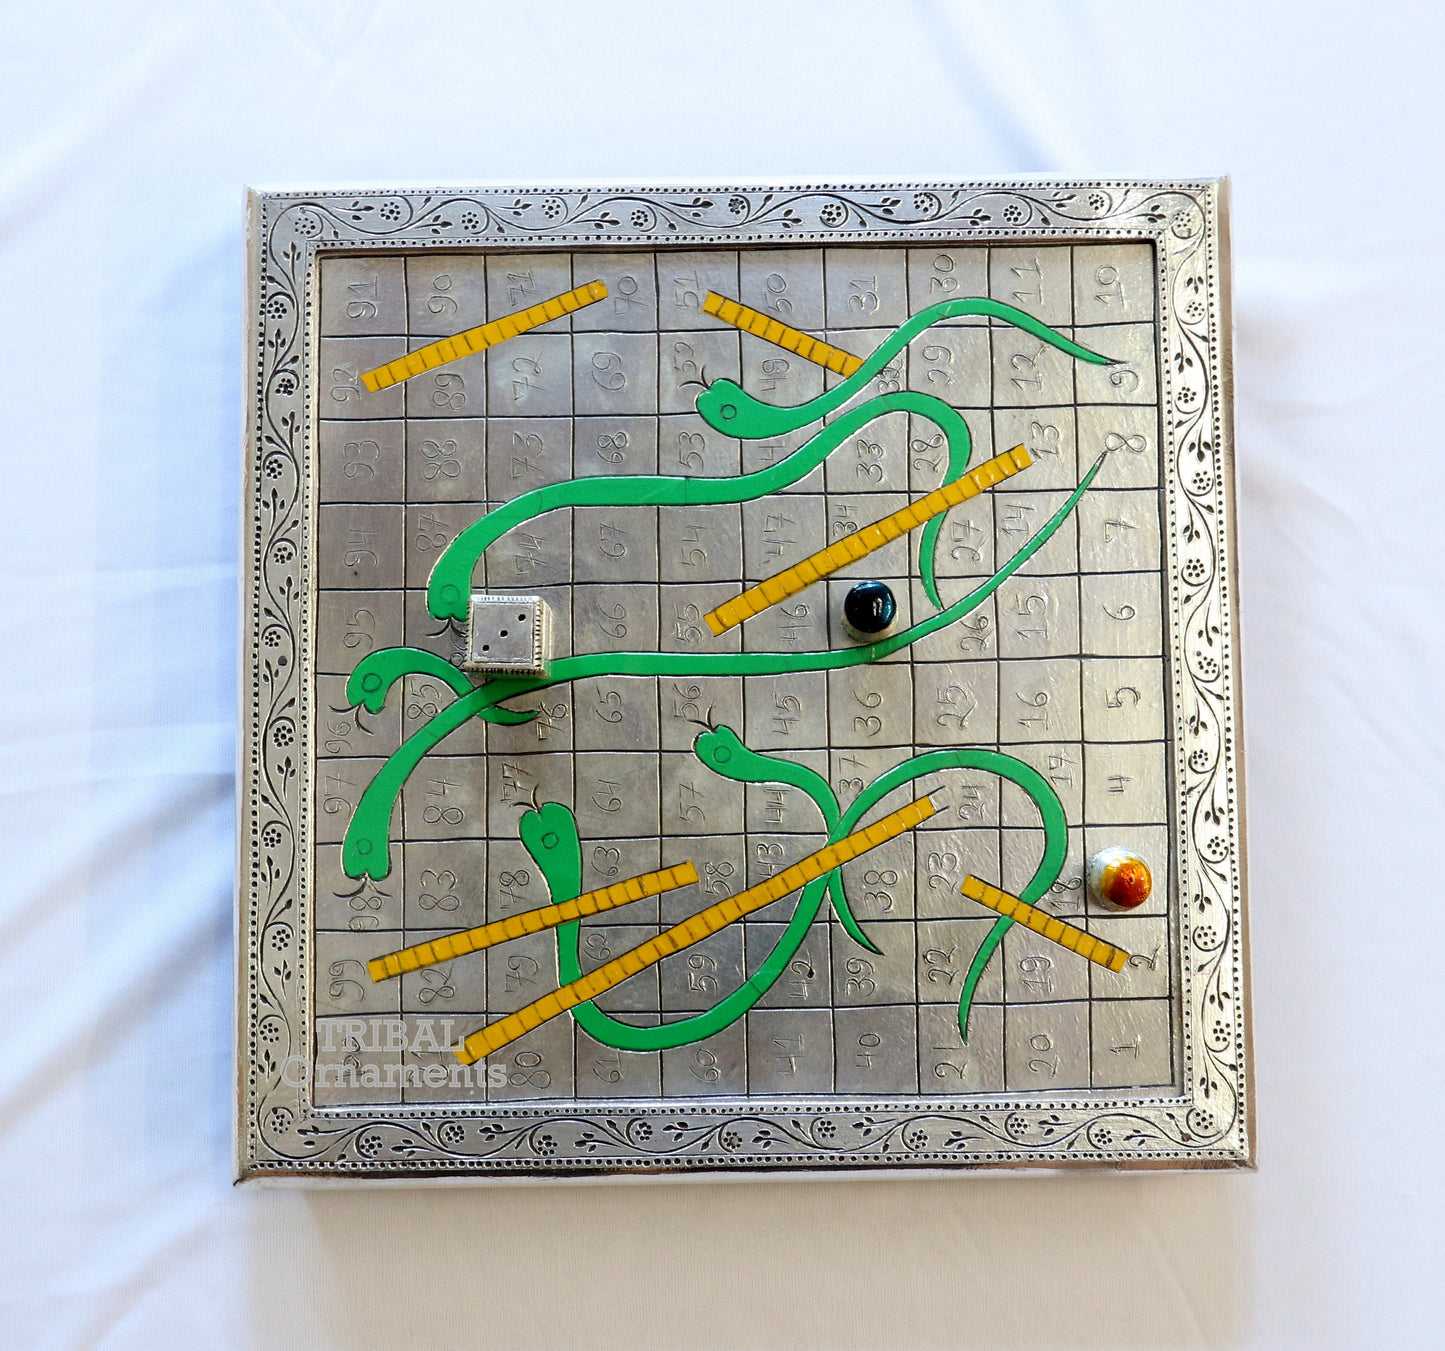 925 sterling silver handcrafted solid silver work snake and ladders game wooden base board, amazing vintage style classical games sf16 - TRIBAL ORNAMENTS